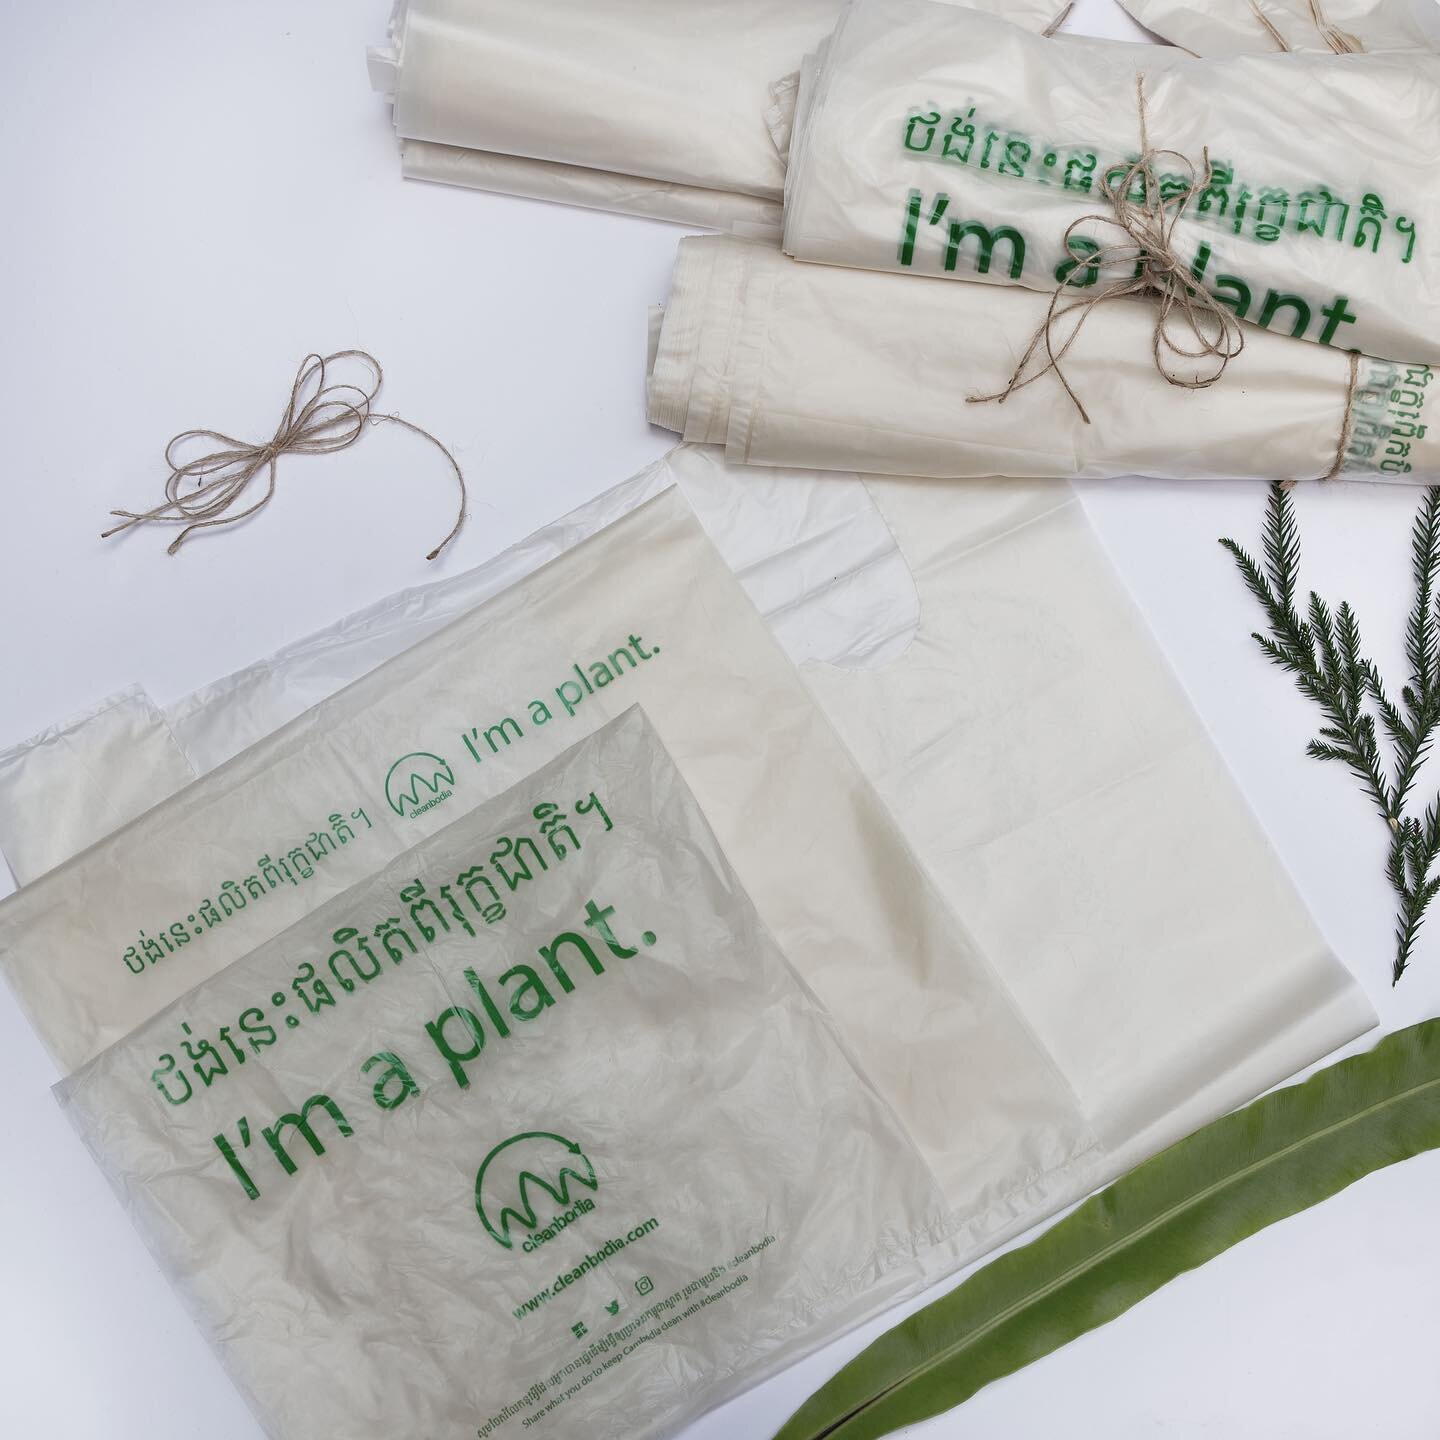 Welcome September 🌱🌿👋
Don&rsquo;t forget to check the inventory of our biodegradable bags! 

Drop your order on our website.
https://www.cleanbodia.com/en/order
#sustanablepackaging
#imaplant
#biodegradablebags 
#biodegradablepackaging